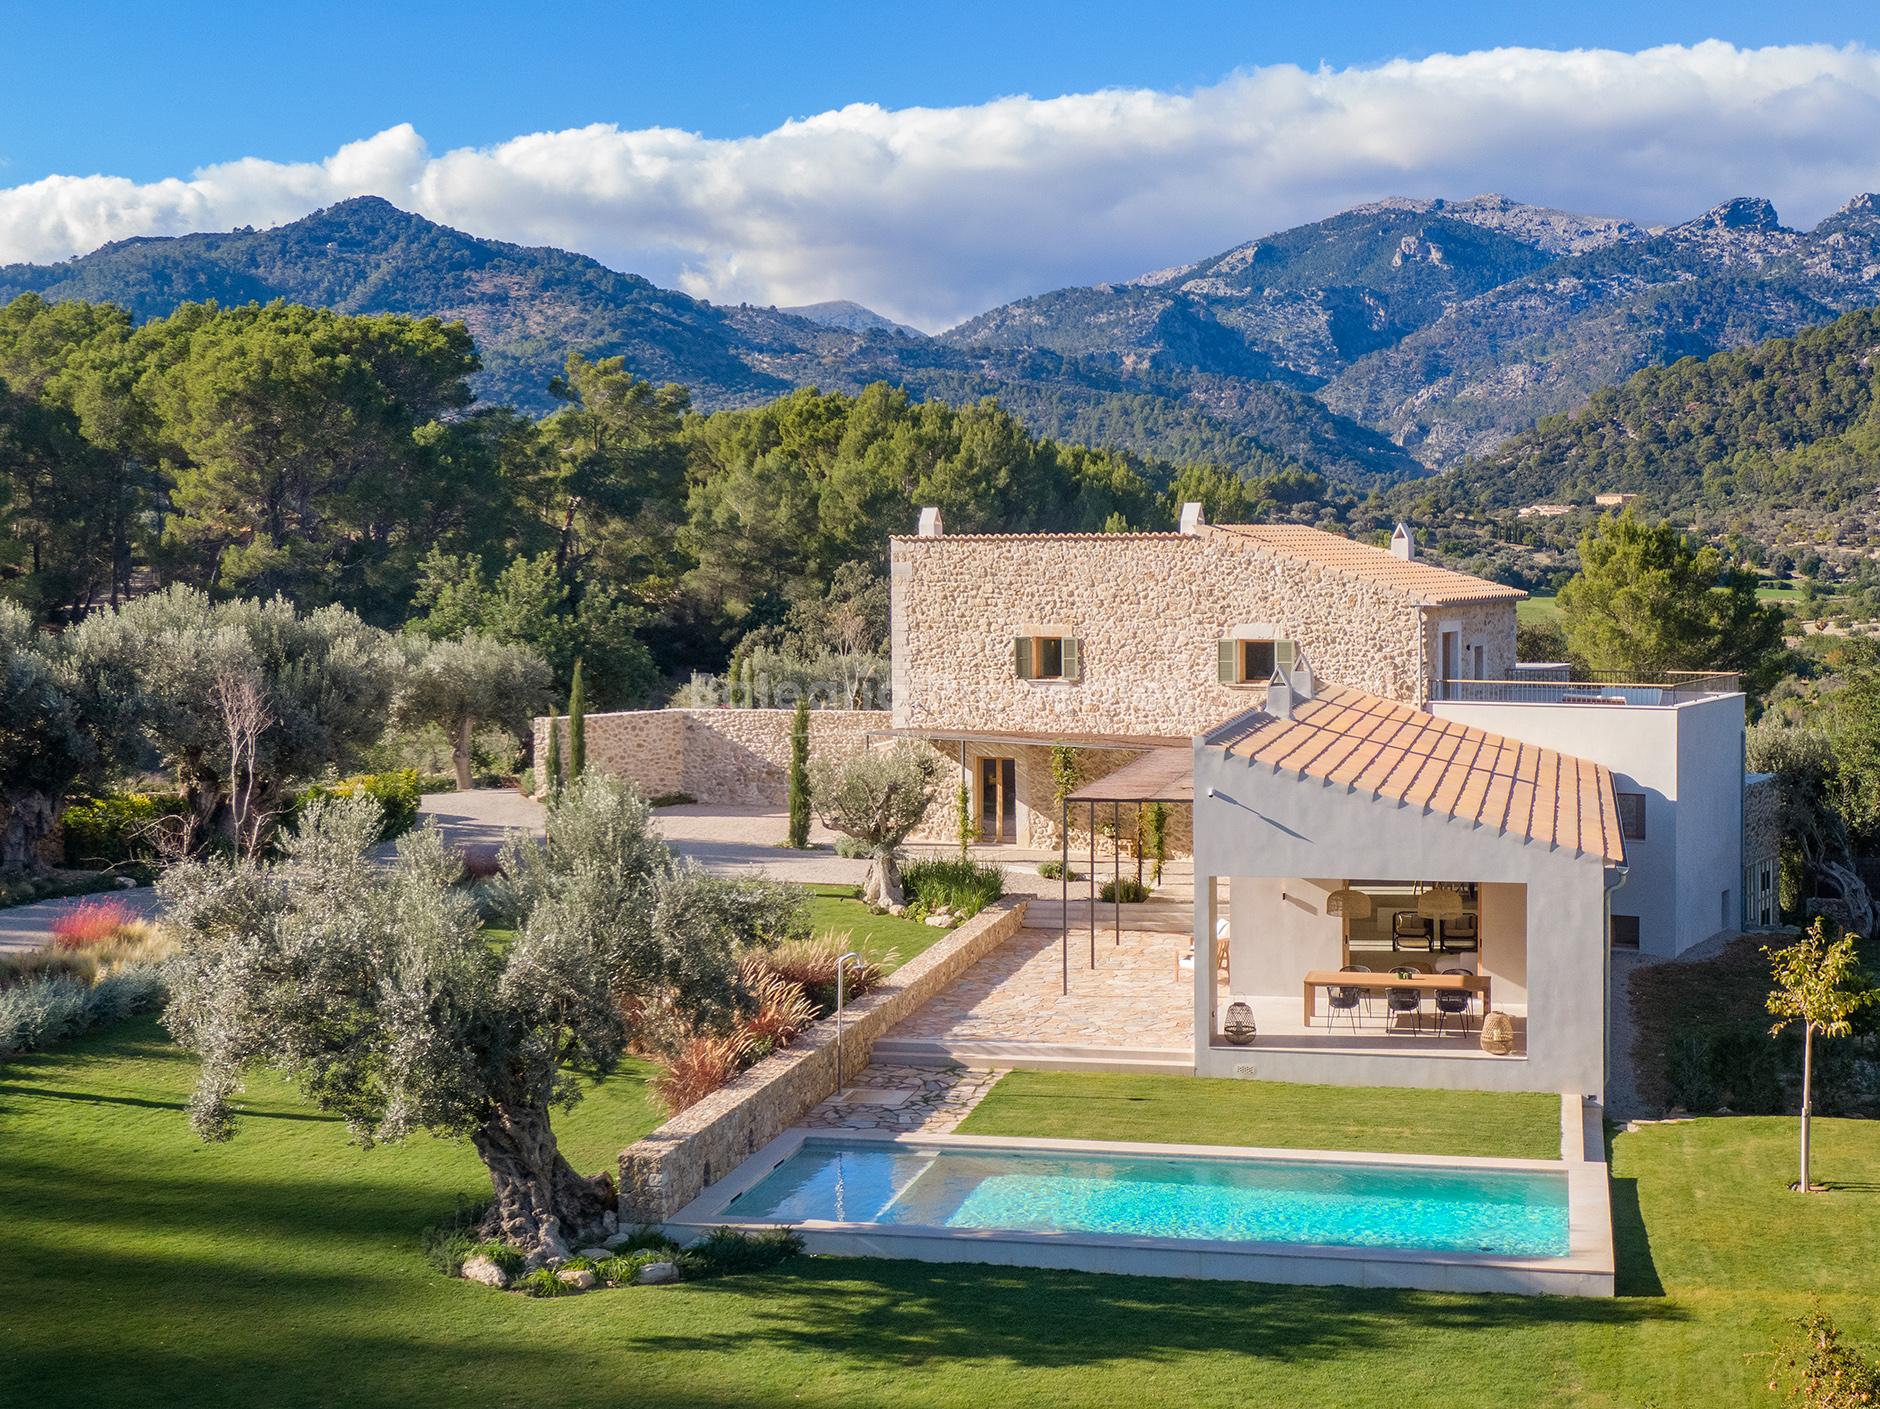 Luxurious country villa for sale with panoramic views in Selva, Mallorca